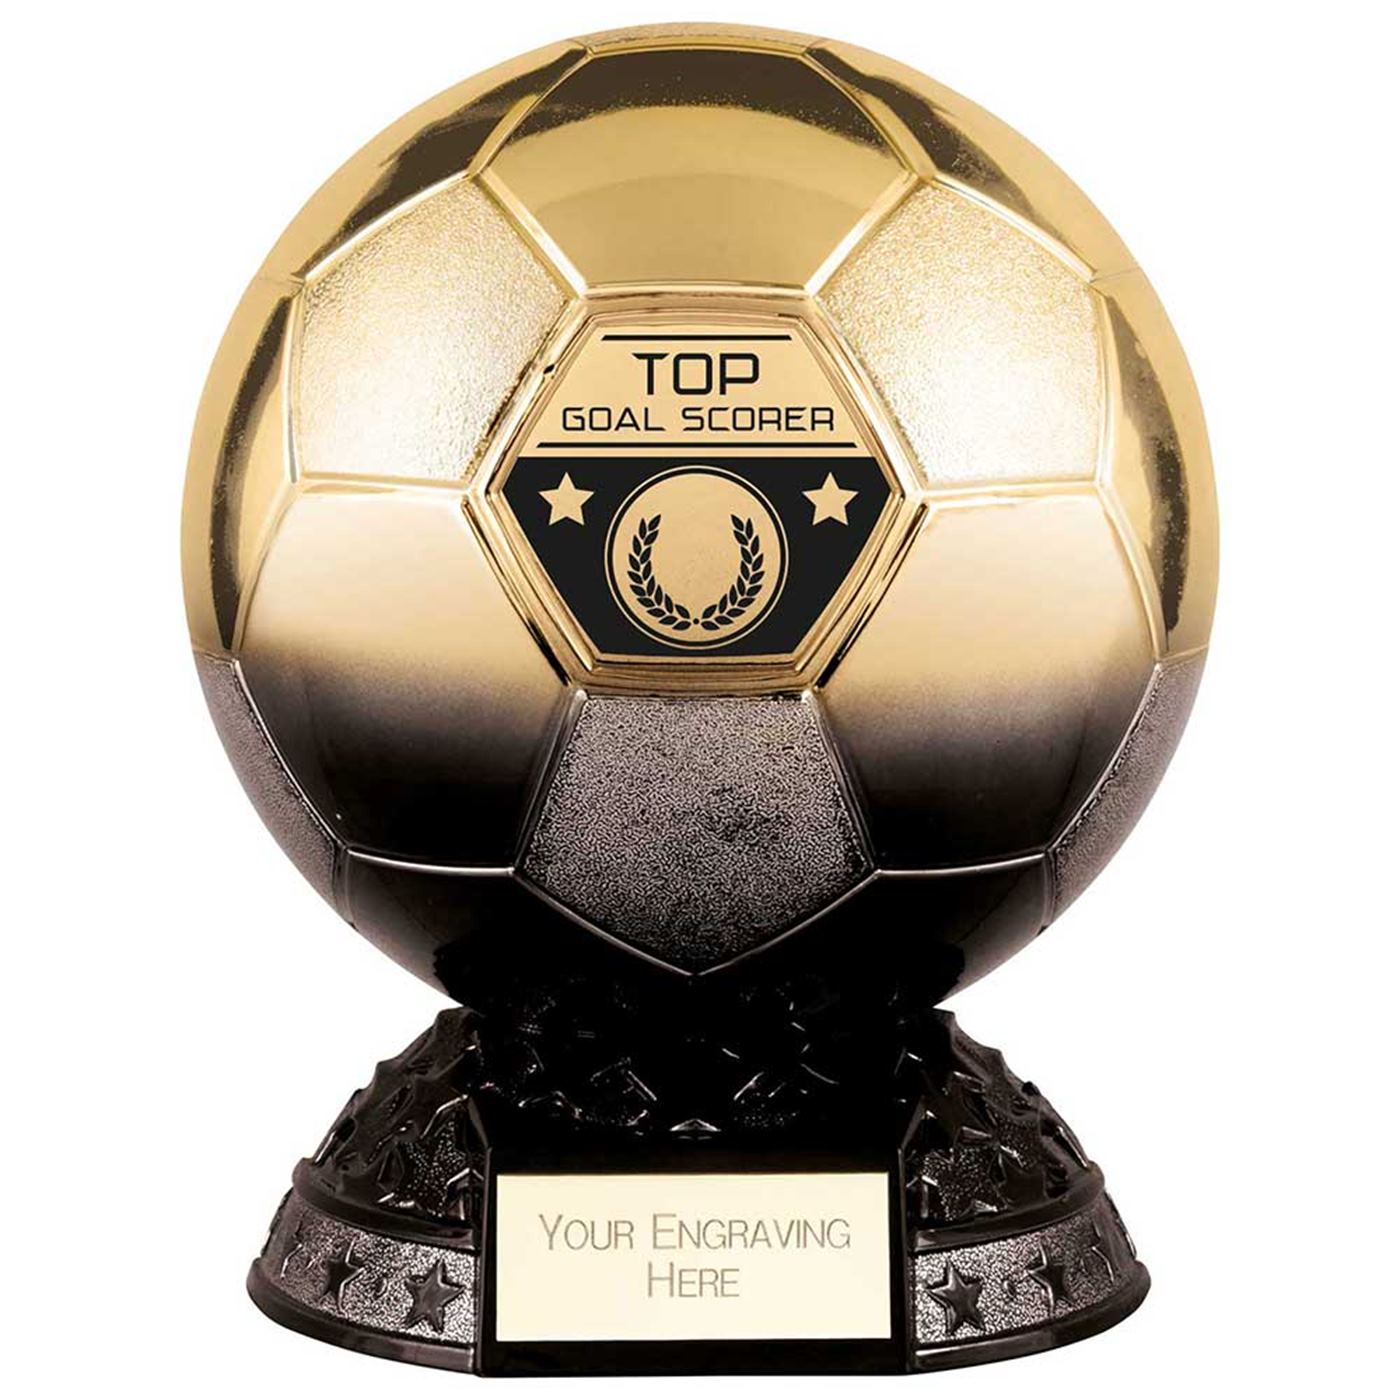 What is the Ballon d'Or trophy worth? Value, material, size